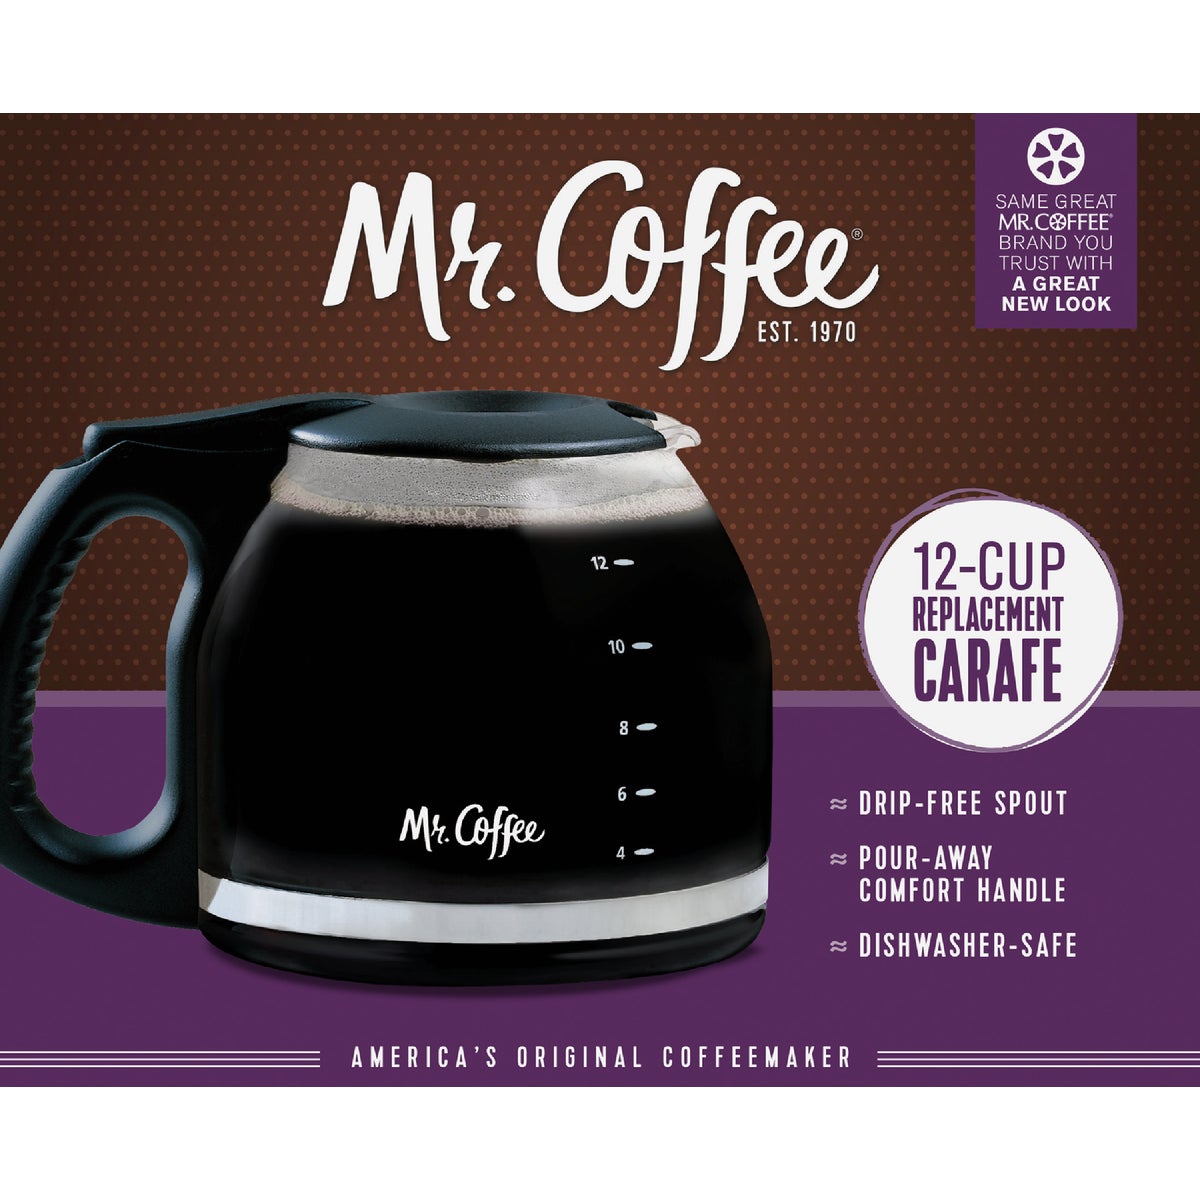 Item 651716, Replacement coffee carafe is designed for the Mr.